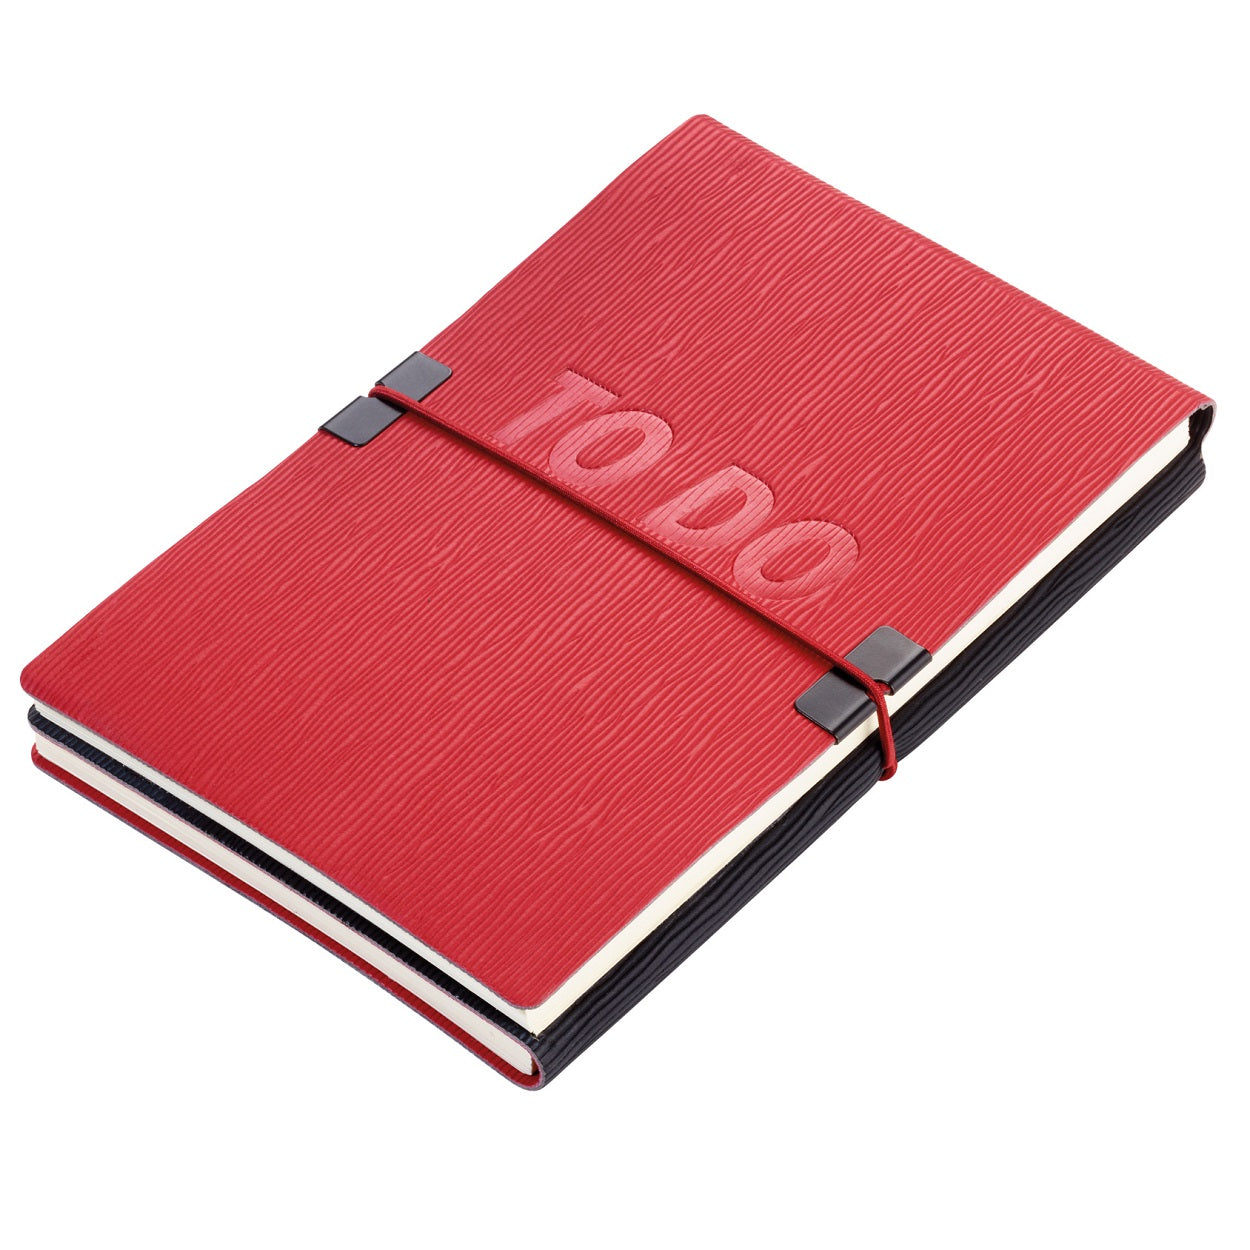 TROIKA Notepads DIN A6 with Back-to-Back Notepads NOTES and TO DO